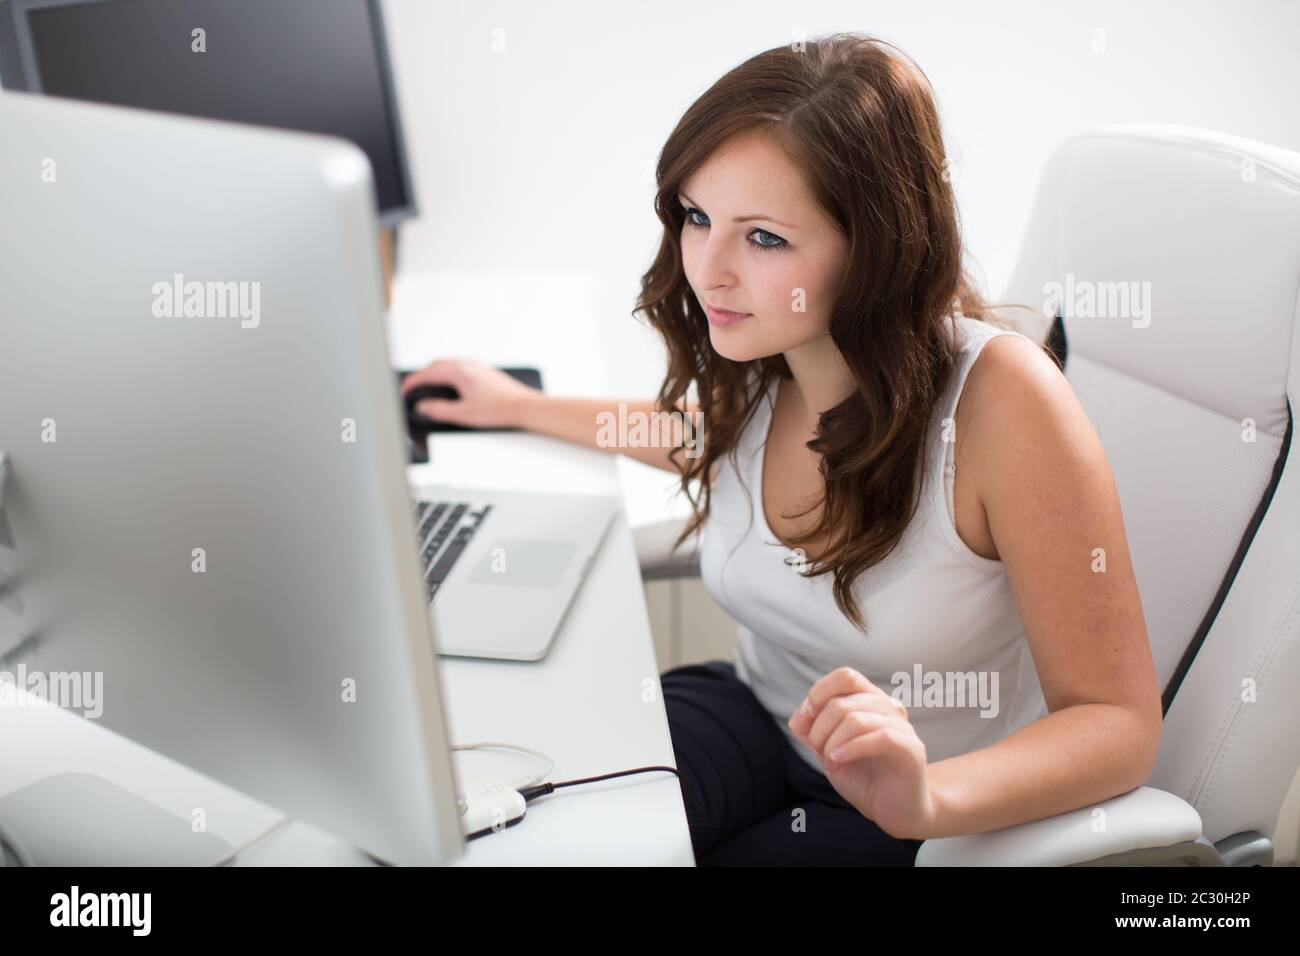 Young woman working on a computer in a home office Stock Photo